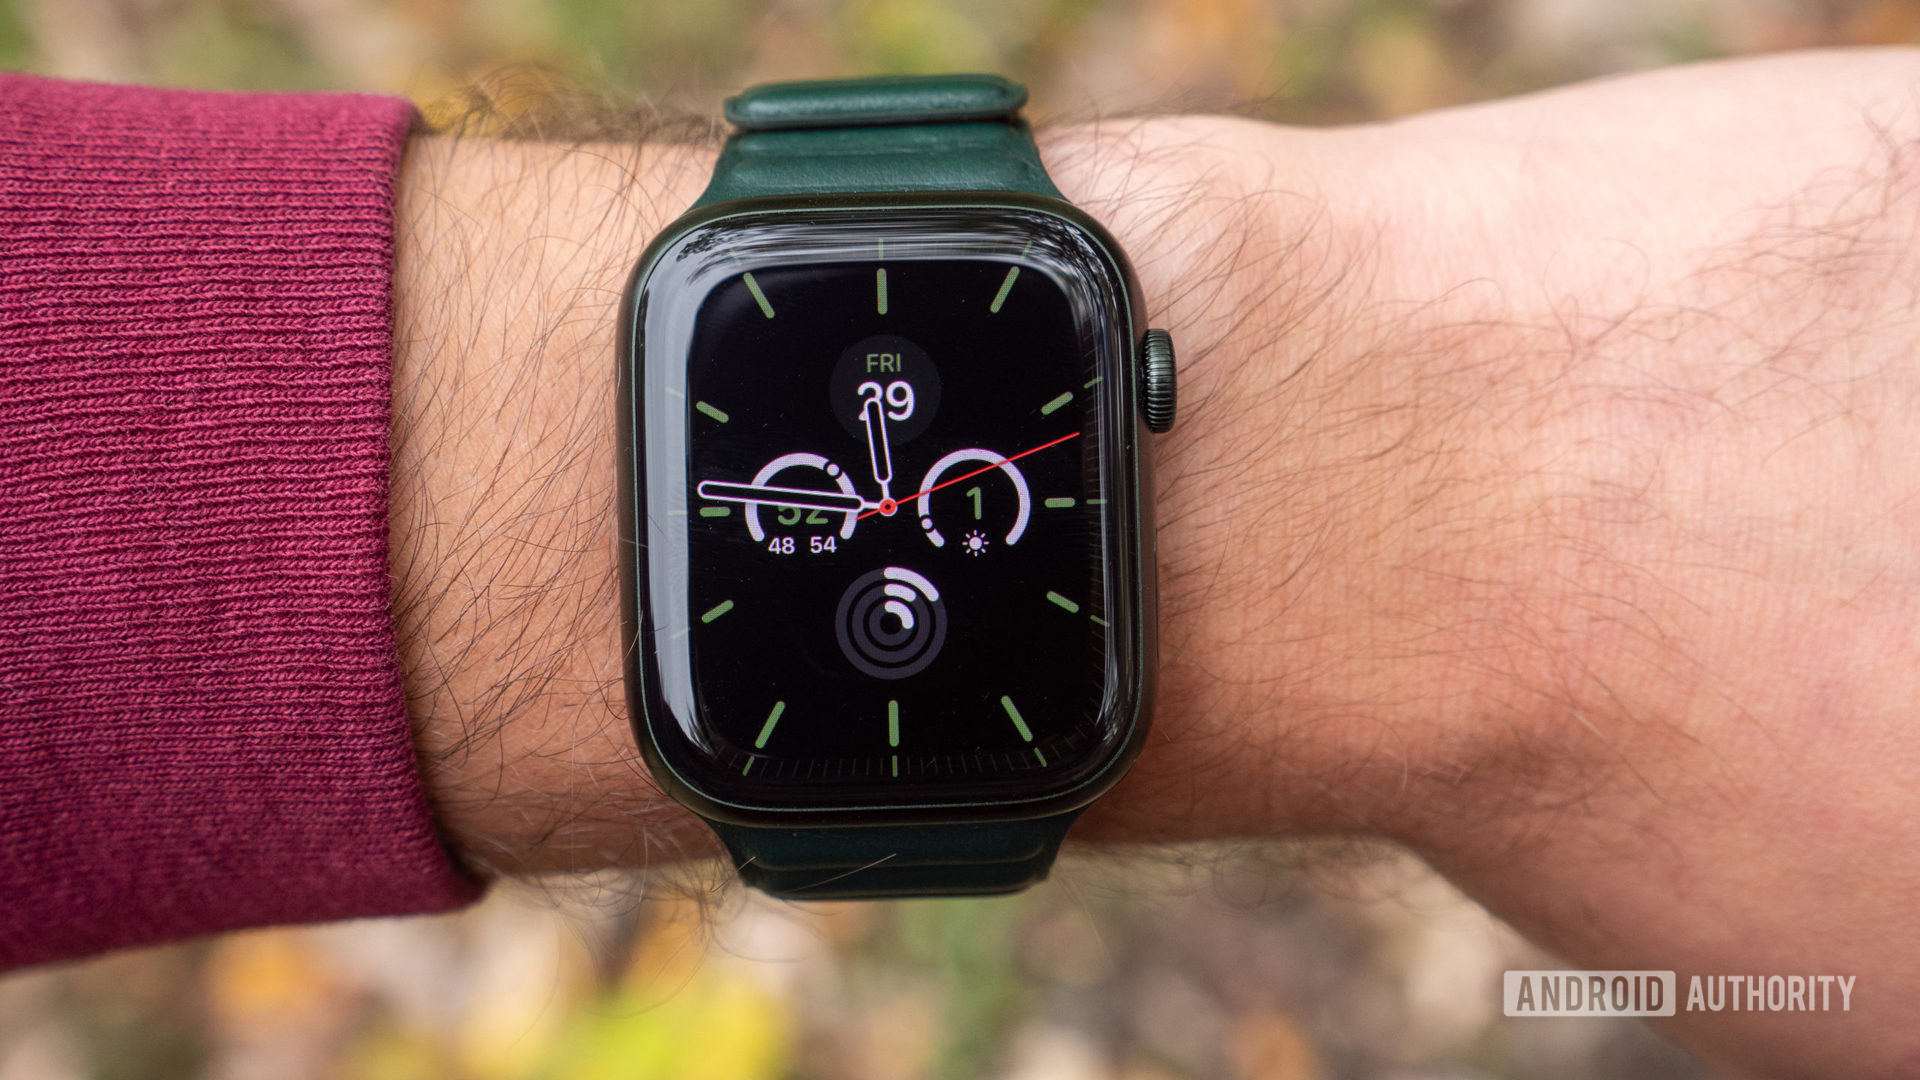 The Apple Watch Series 7 on a wrist showing the Meridian watch face